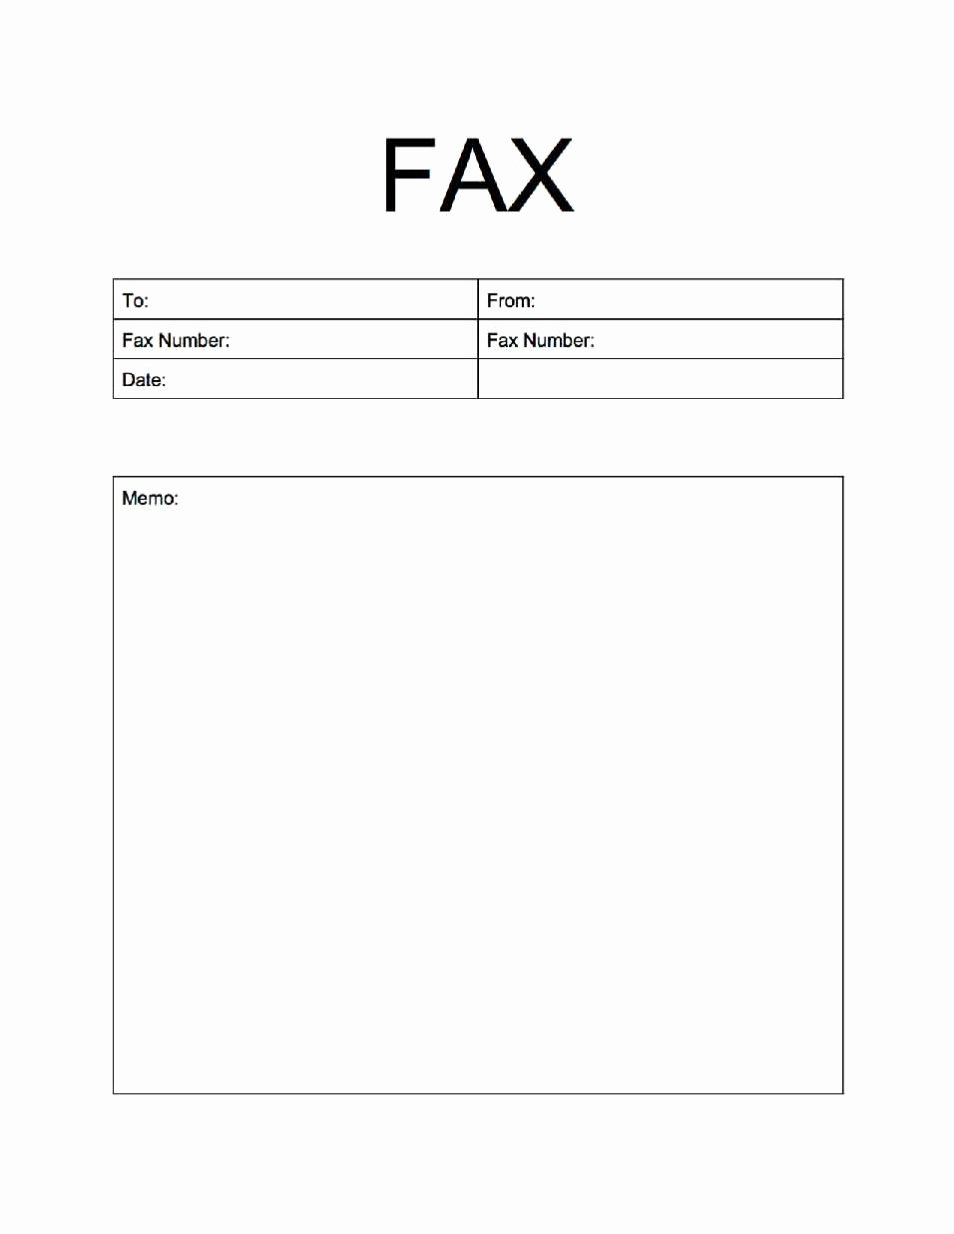 Fax Cover Sheet Template Free Awesome Printable Fax Cover Sheet